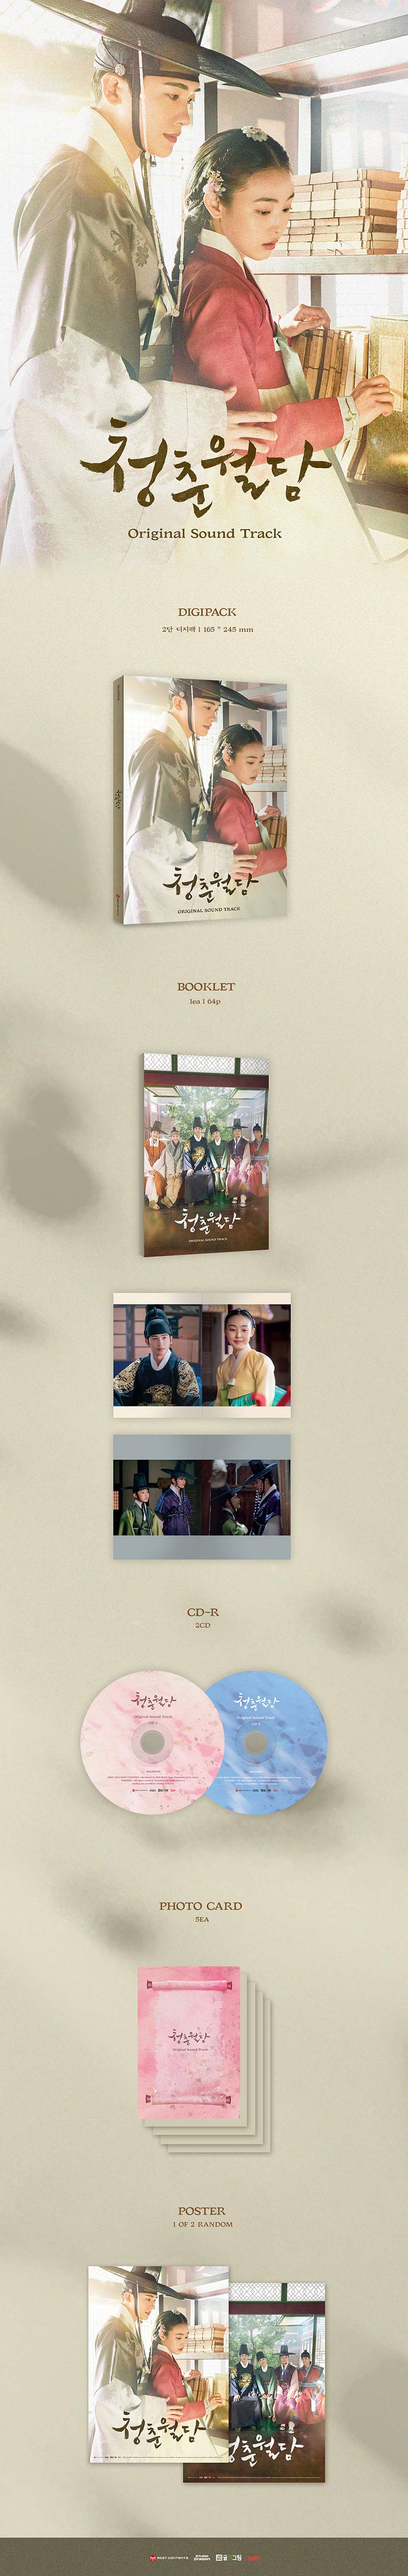 Our Blooming Youth - OST 2CD